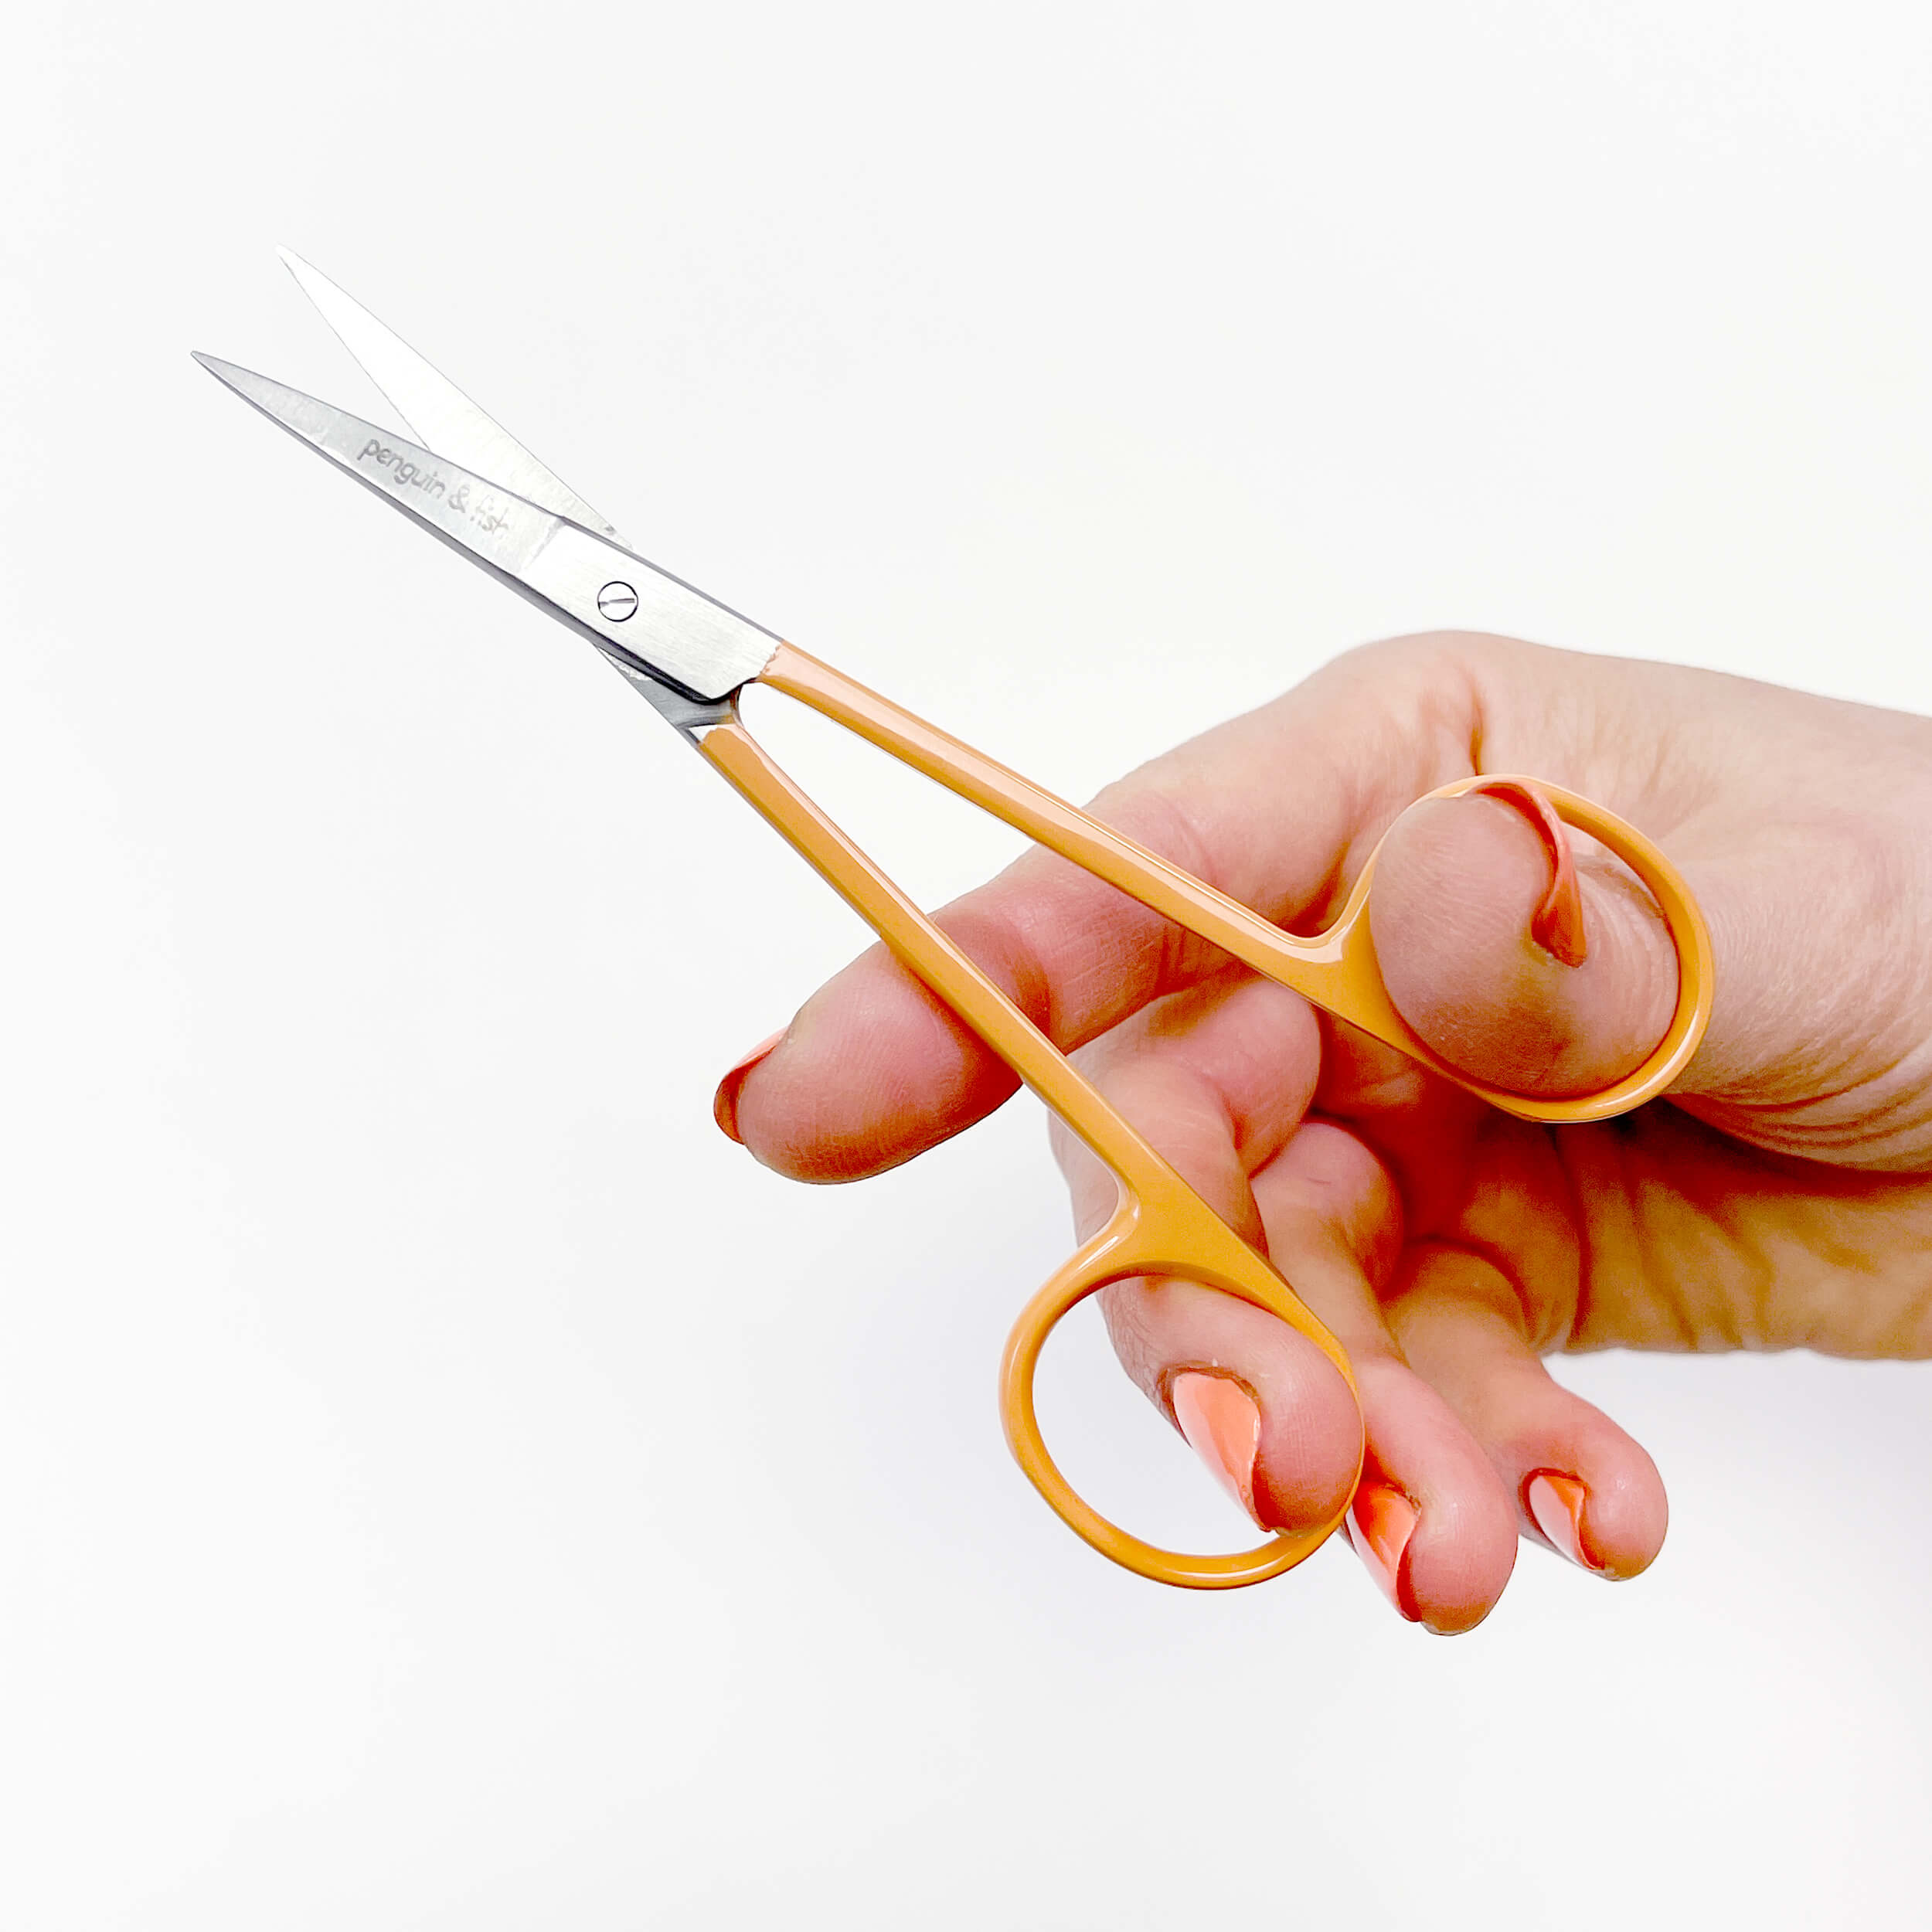 4.5-inch colorful straight embroidery scissors